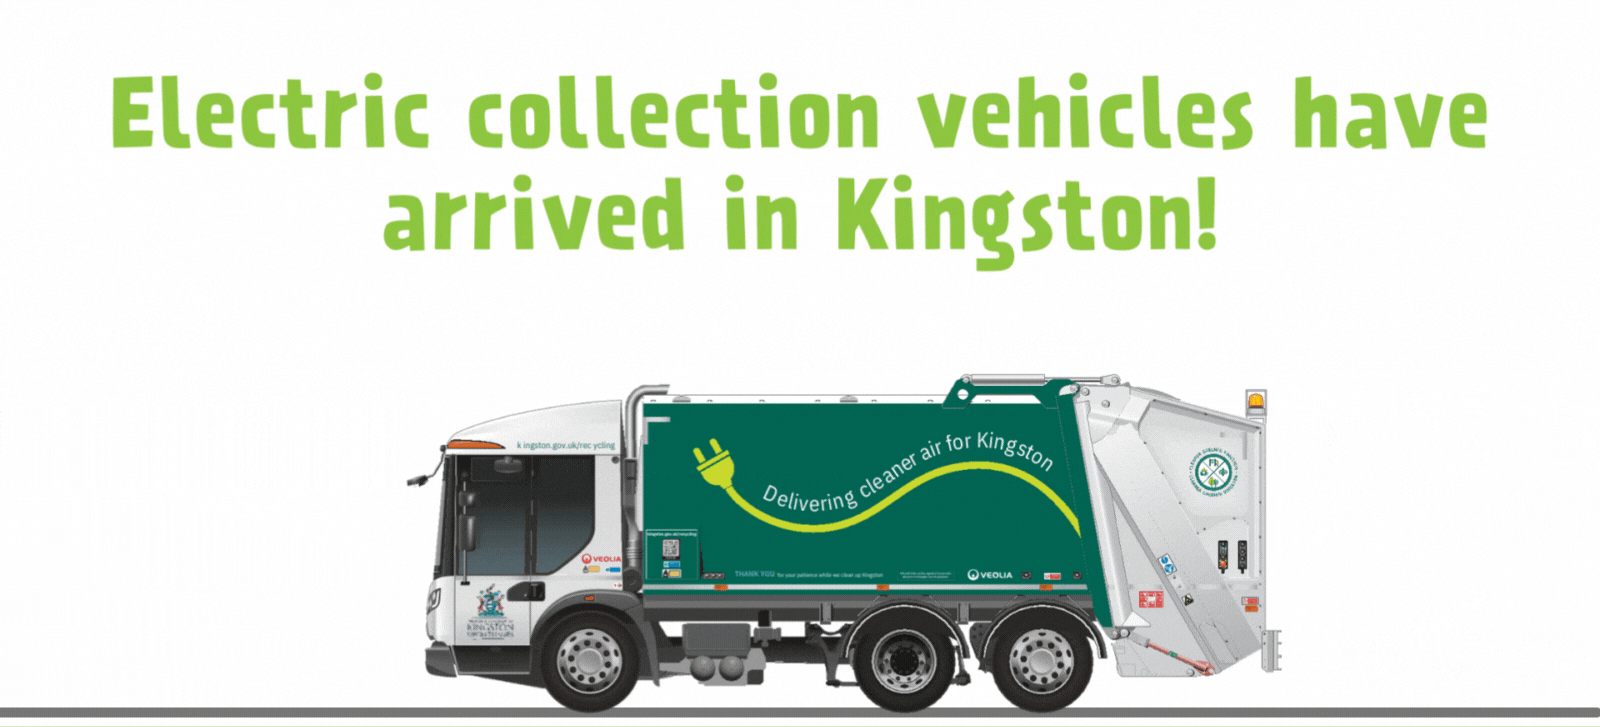 Kingston's electric waste collection vehicle